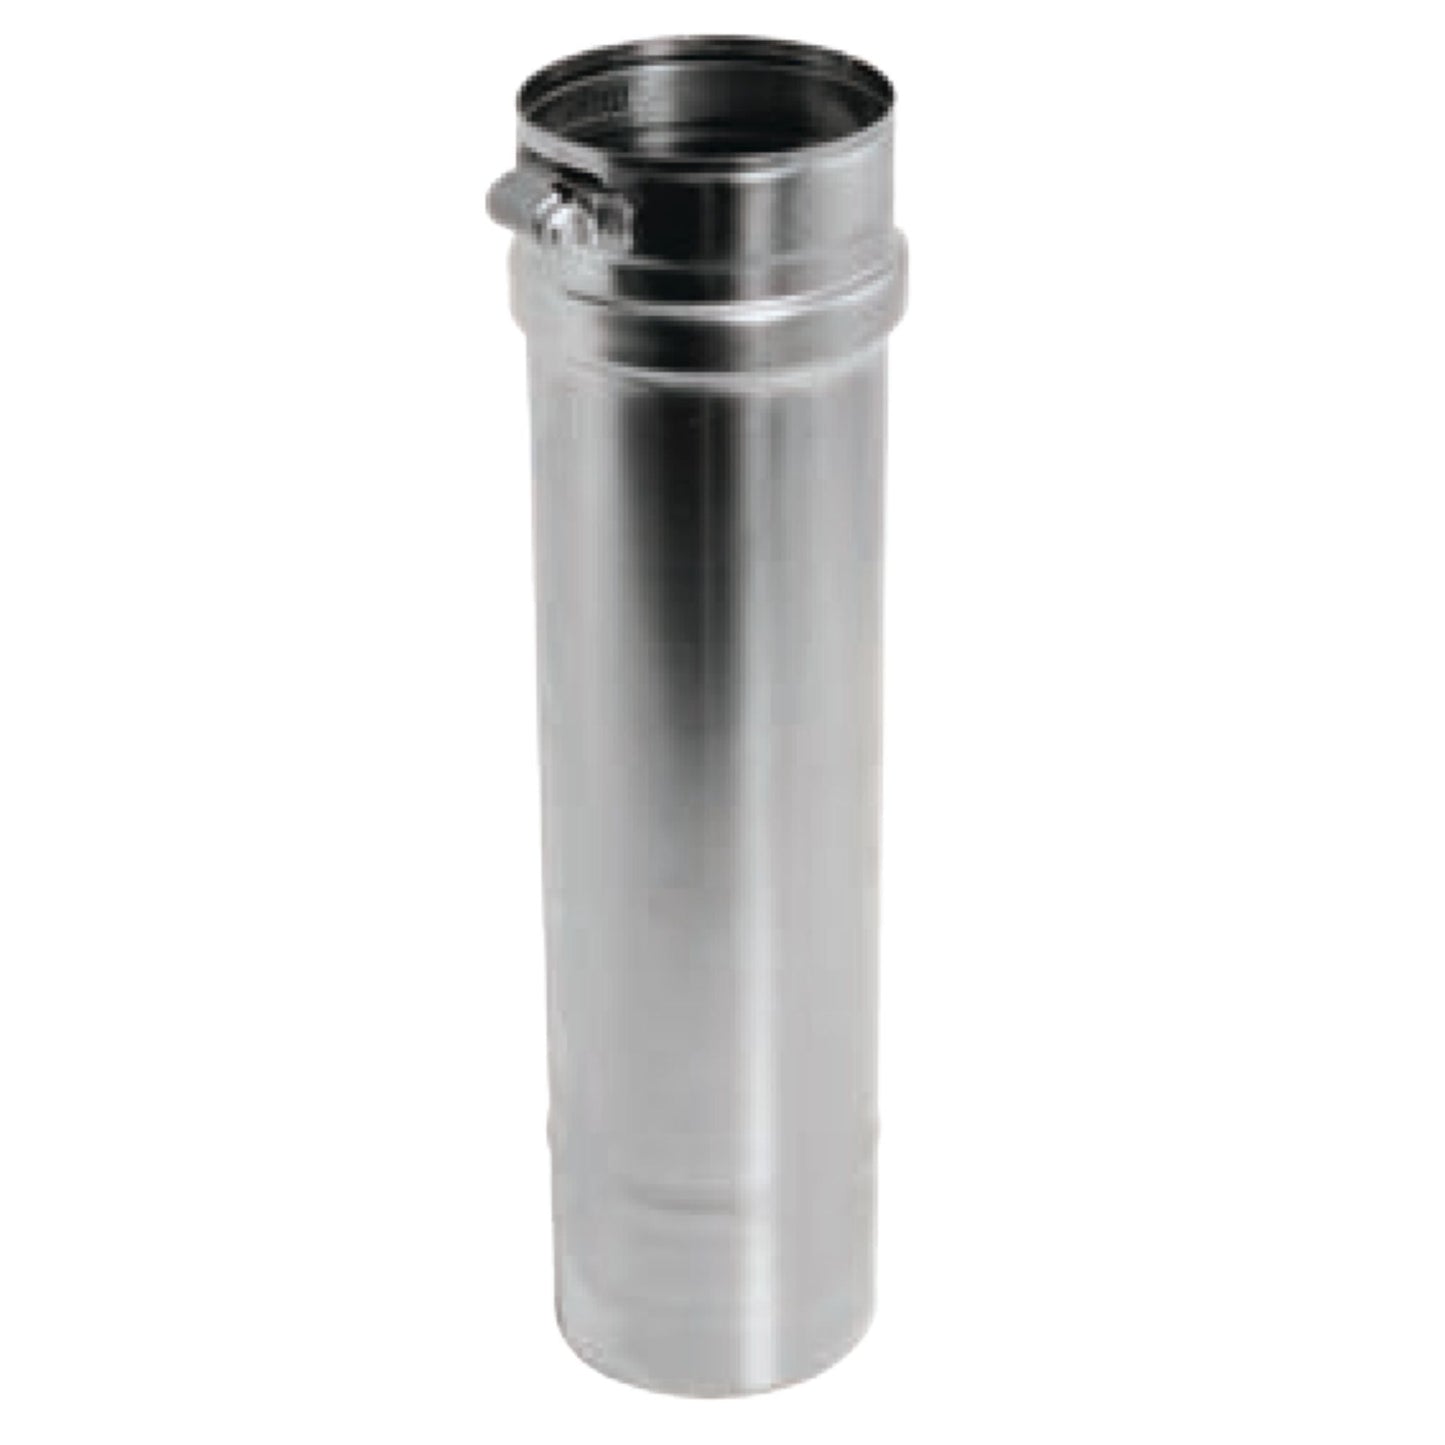 DuraVent FasNSeal 10" x 12" 29-4C Stainless Steel Vent Length